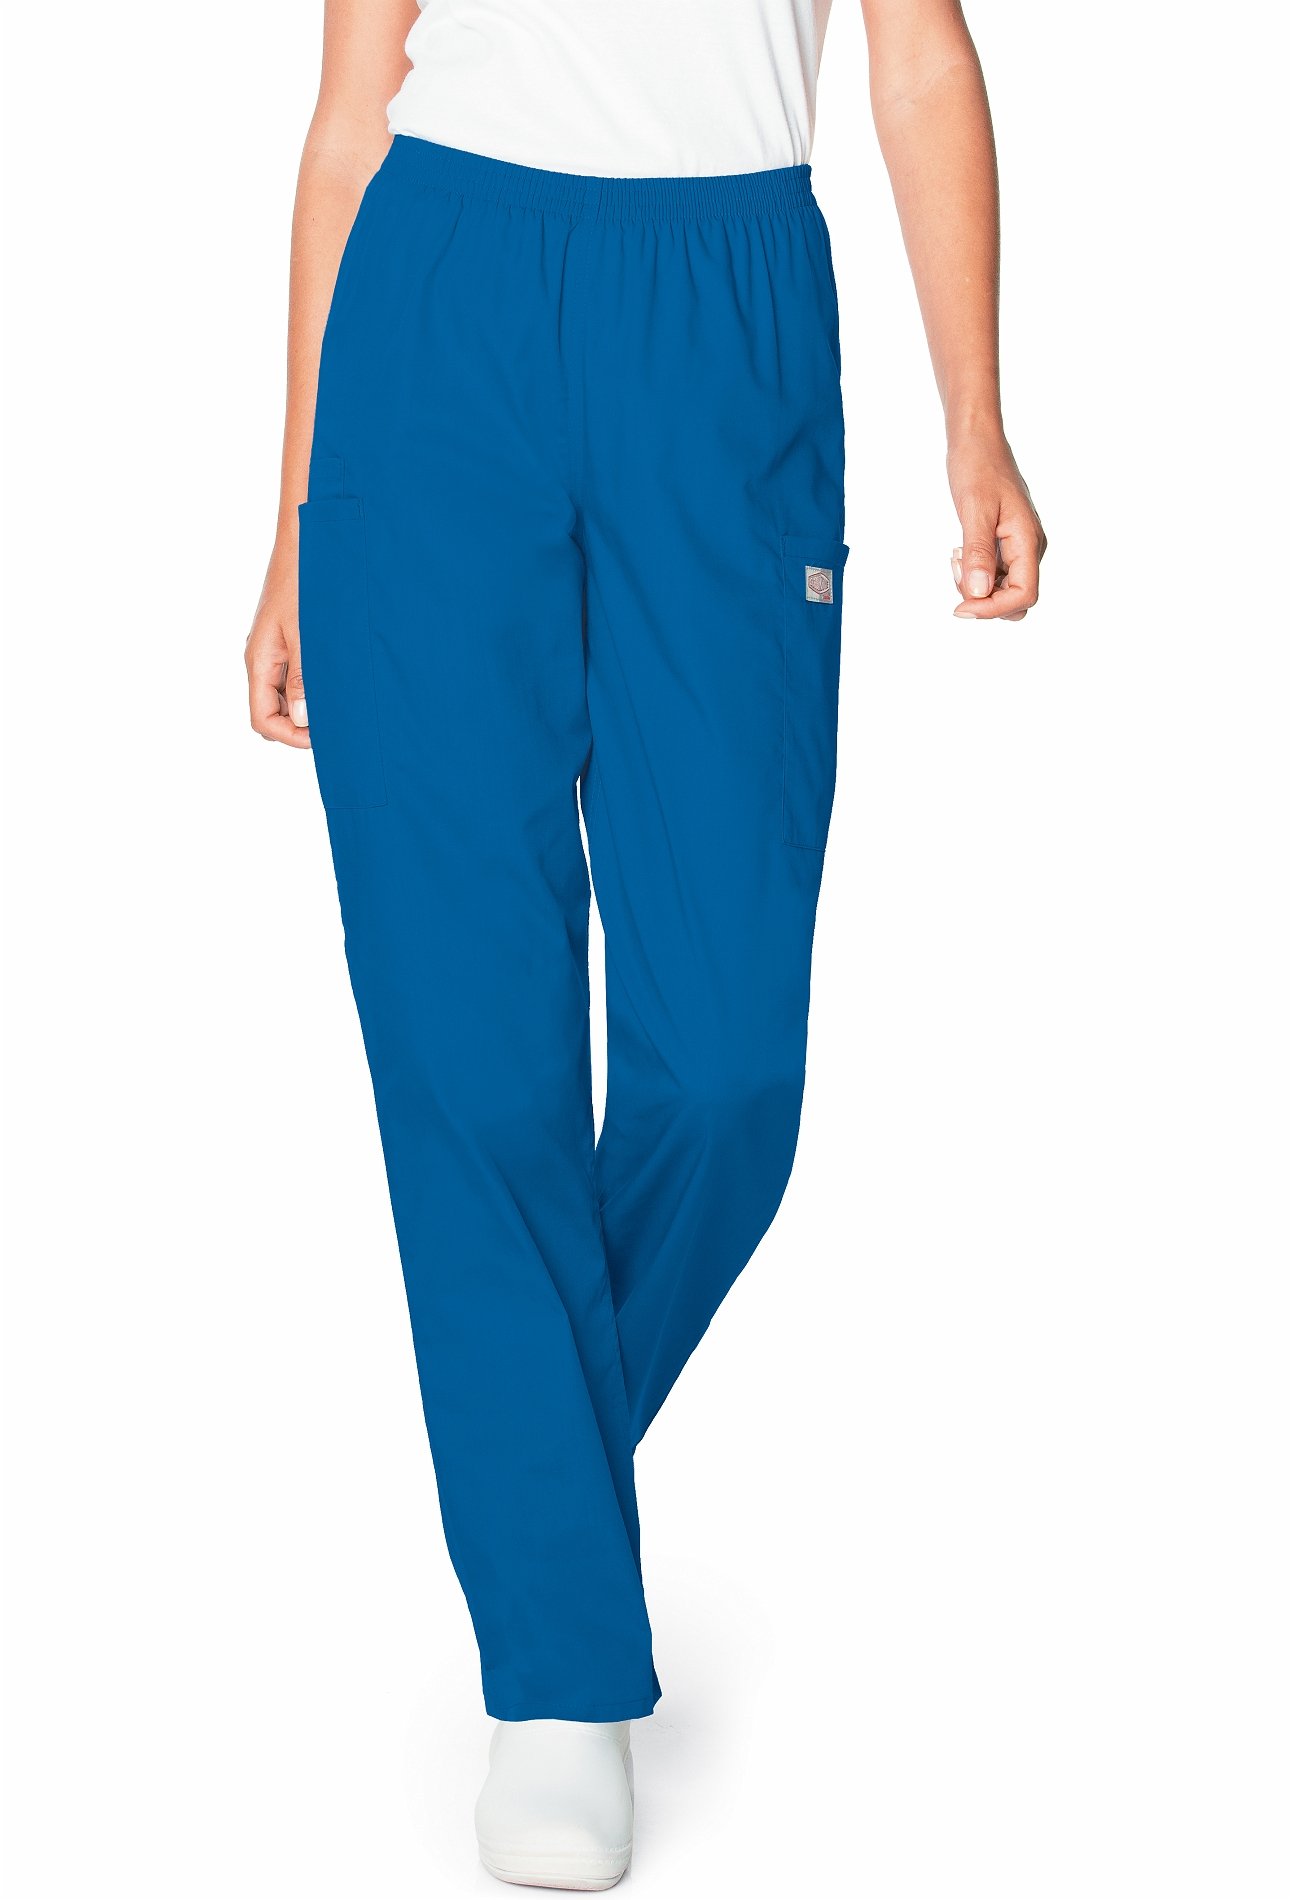 Dickies Eds Essentials Women's 6-Pocket Stretch Cargo Jogger Scrub Pants -  Petite Size 3X, Ceil Blue Polyester/Spandex in 2023